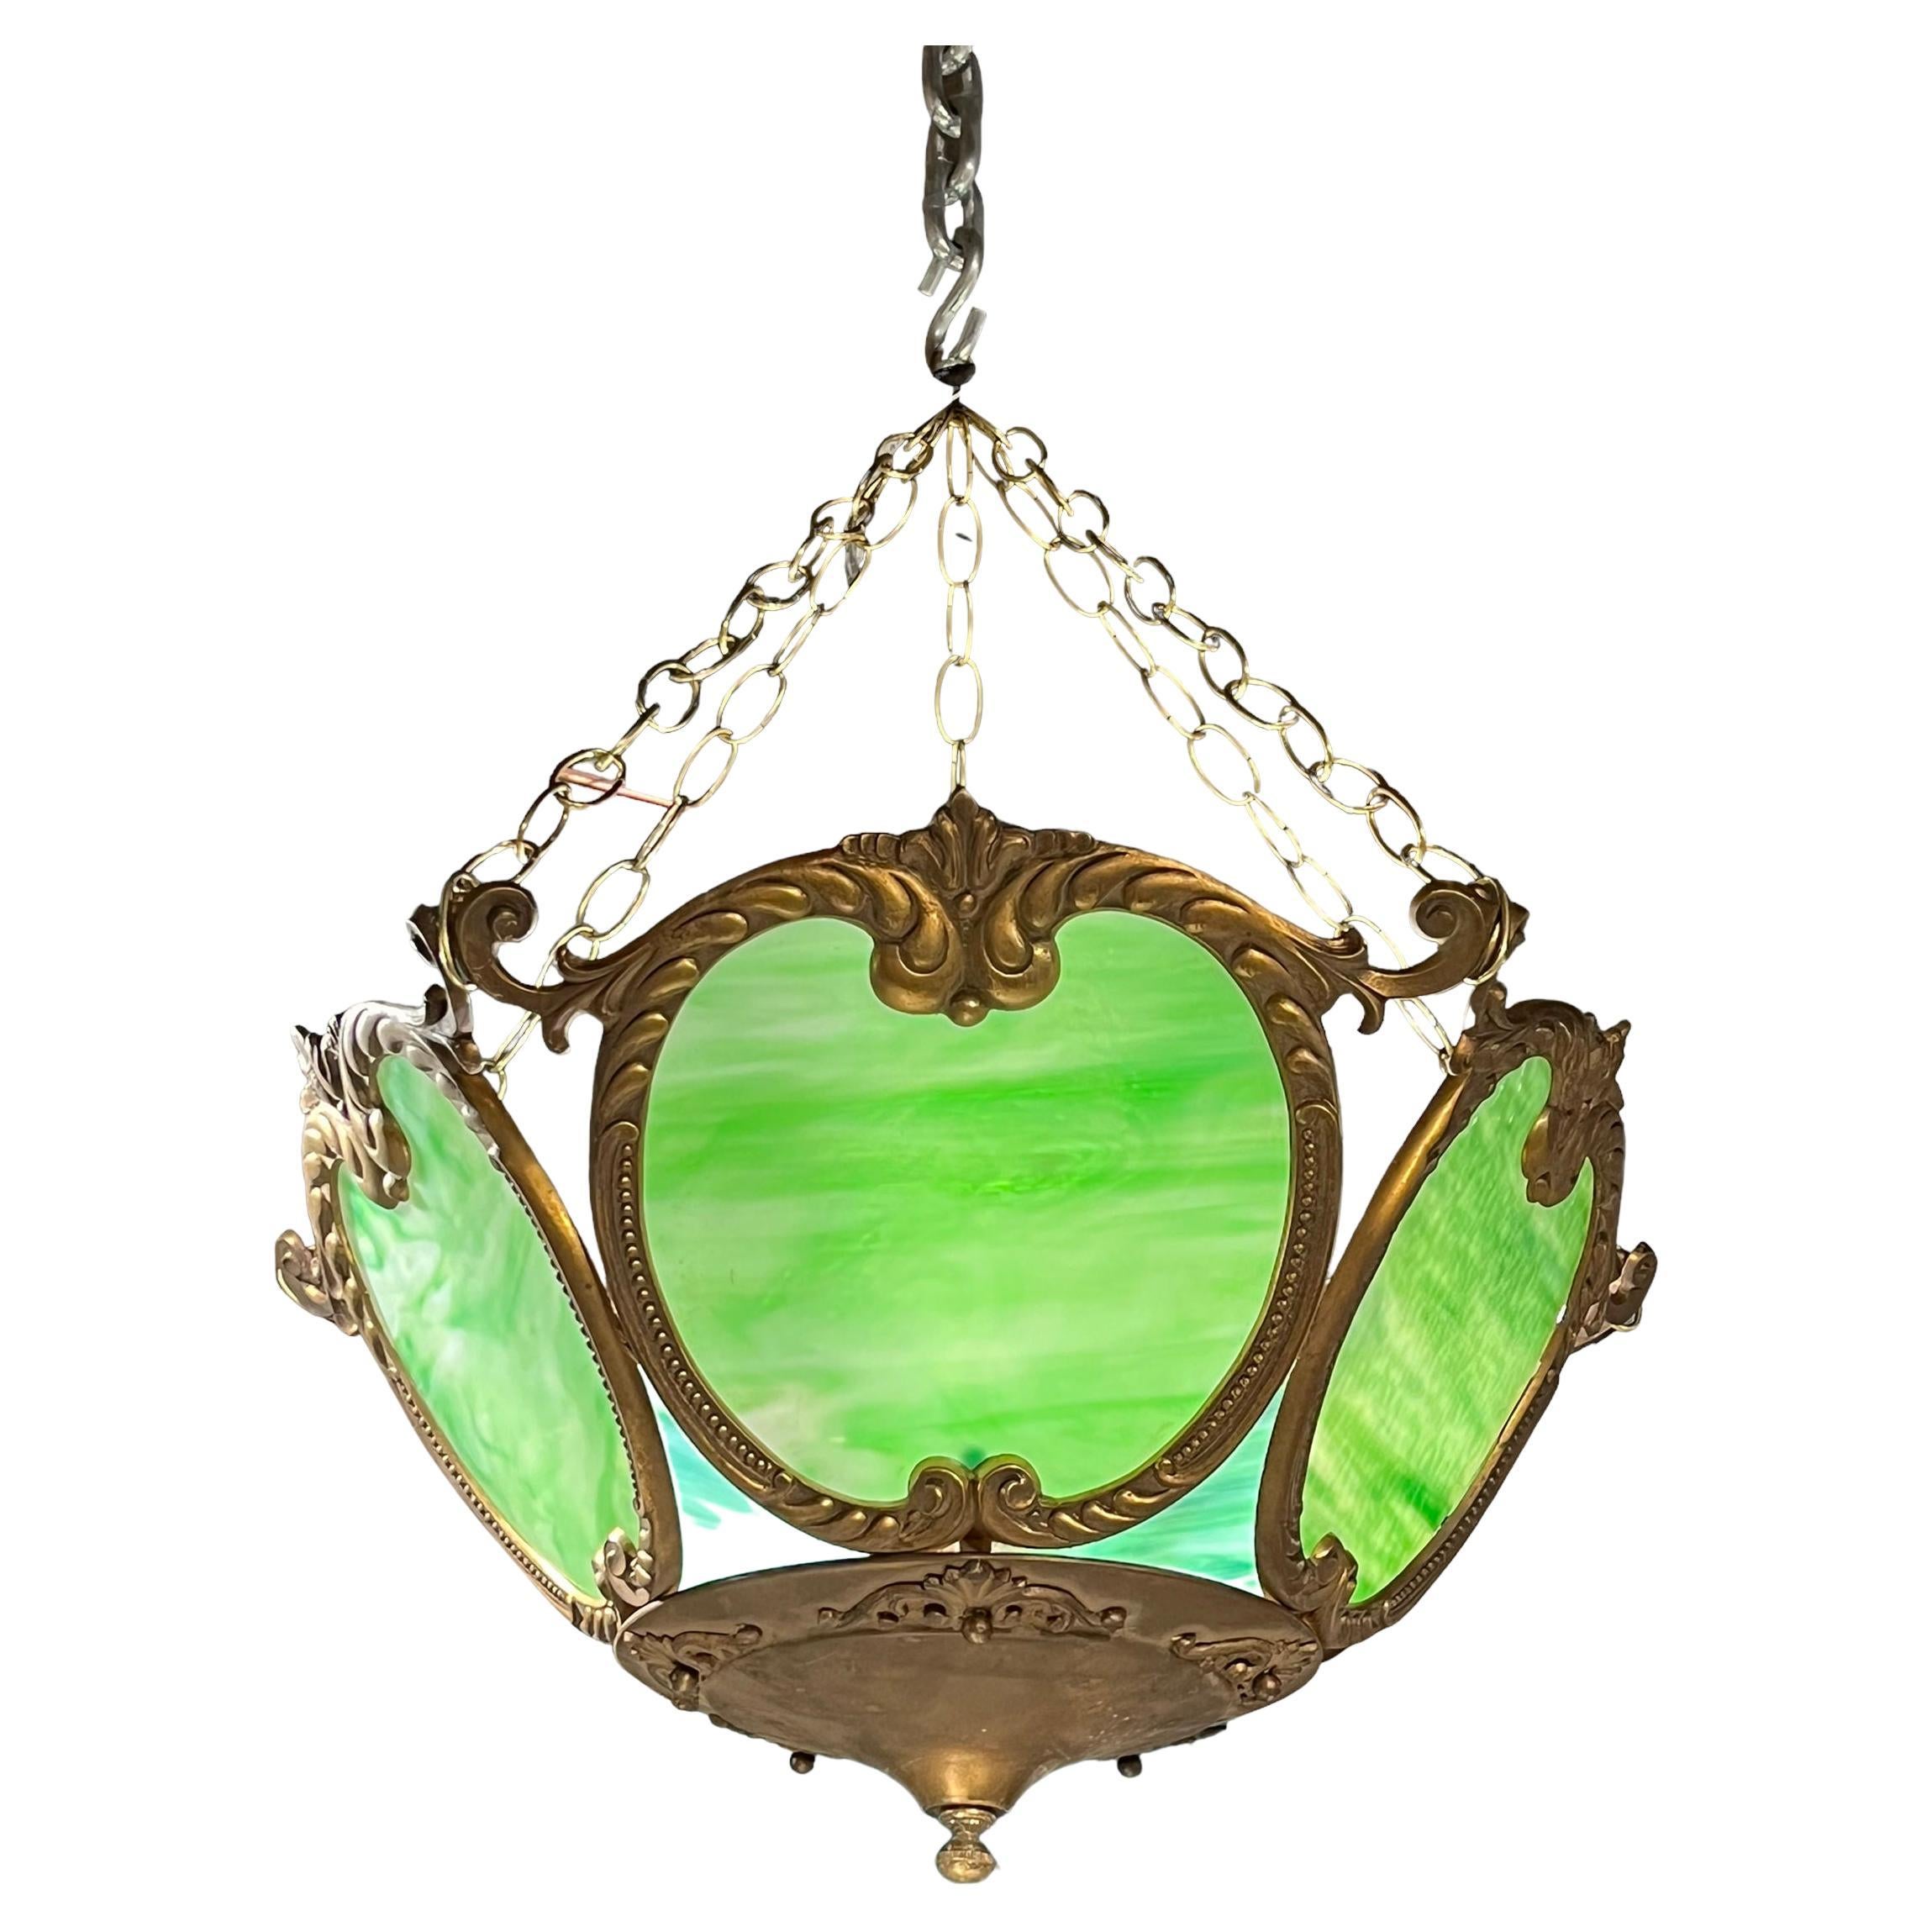 Vintage Green Slag Glass and Bronze Chandelier in Arts and Crafts Style